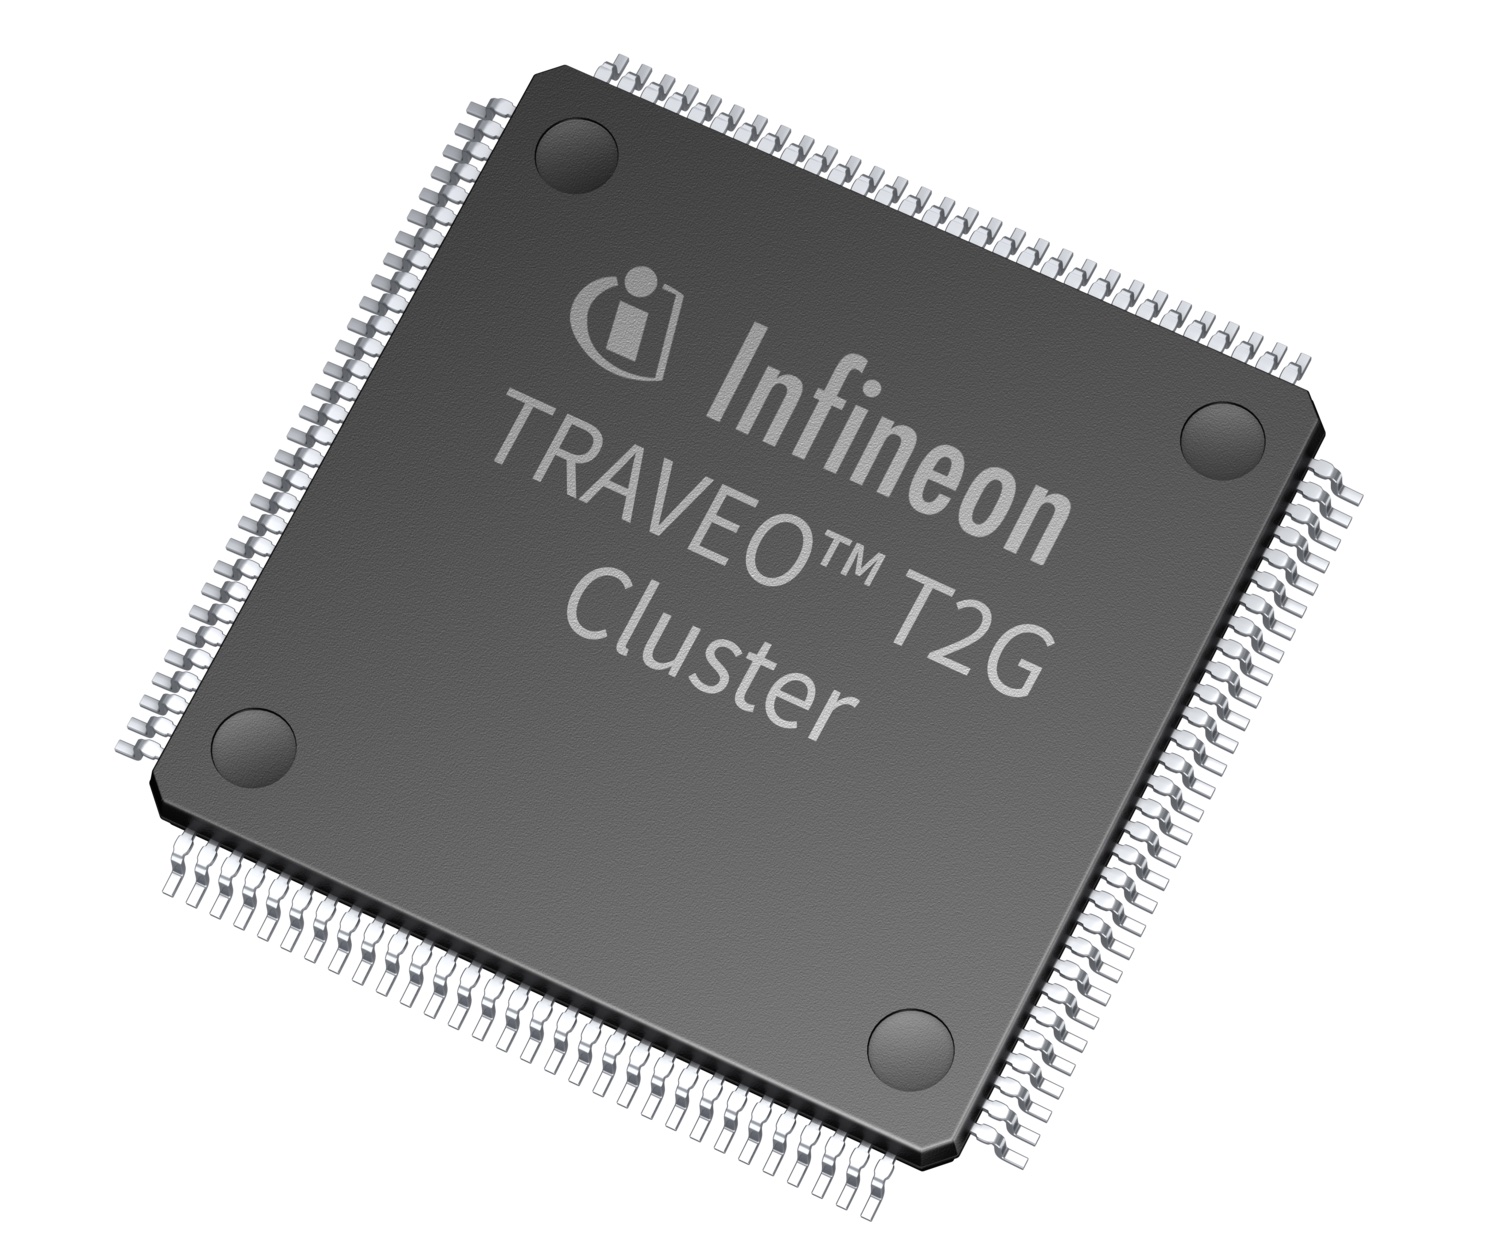 Infineon Enhances the TRAVEO T2G MCU Family with Qt Group Graphics Solution to Enable Intelligent Rendering Technologies